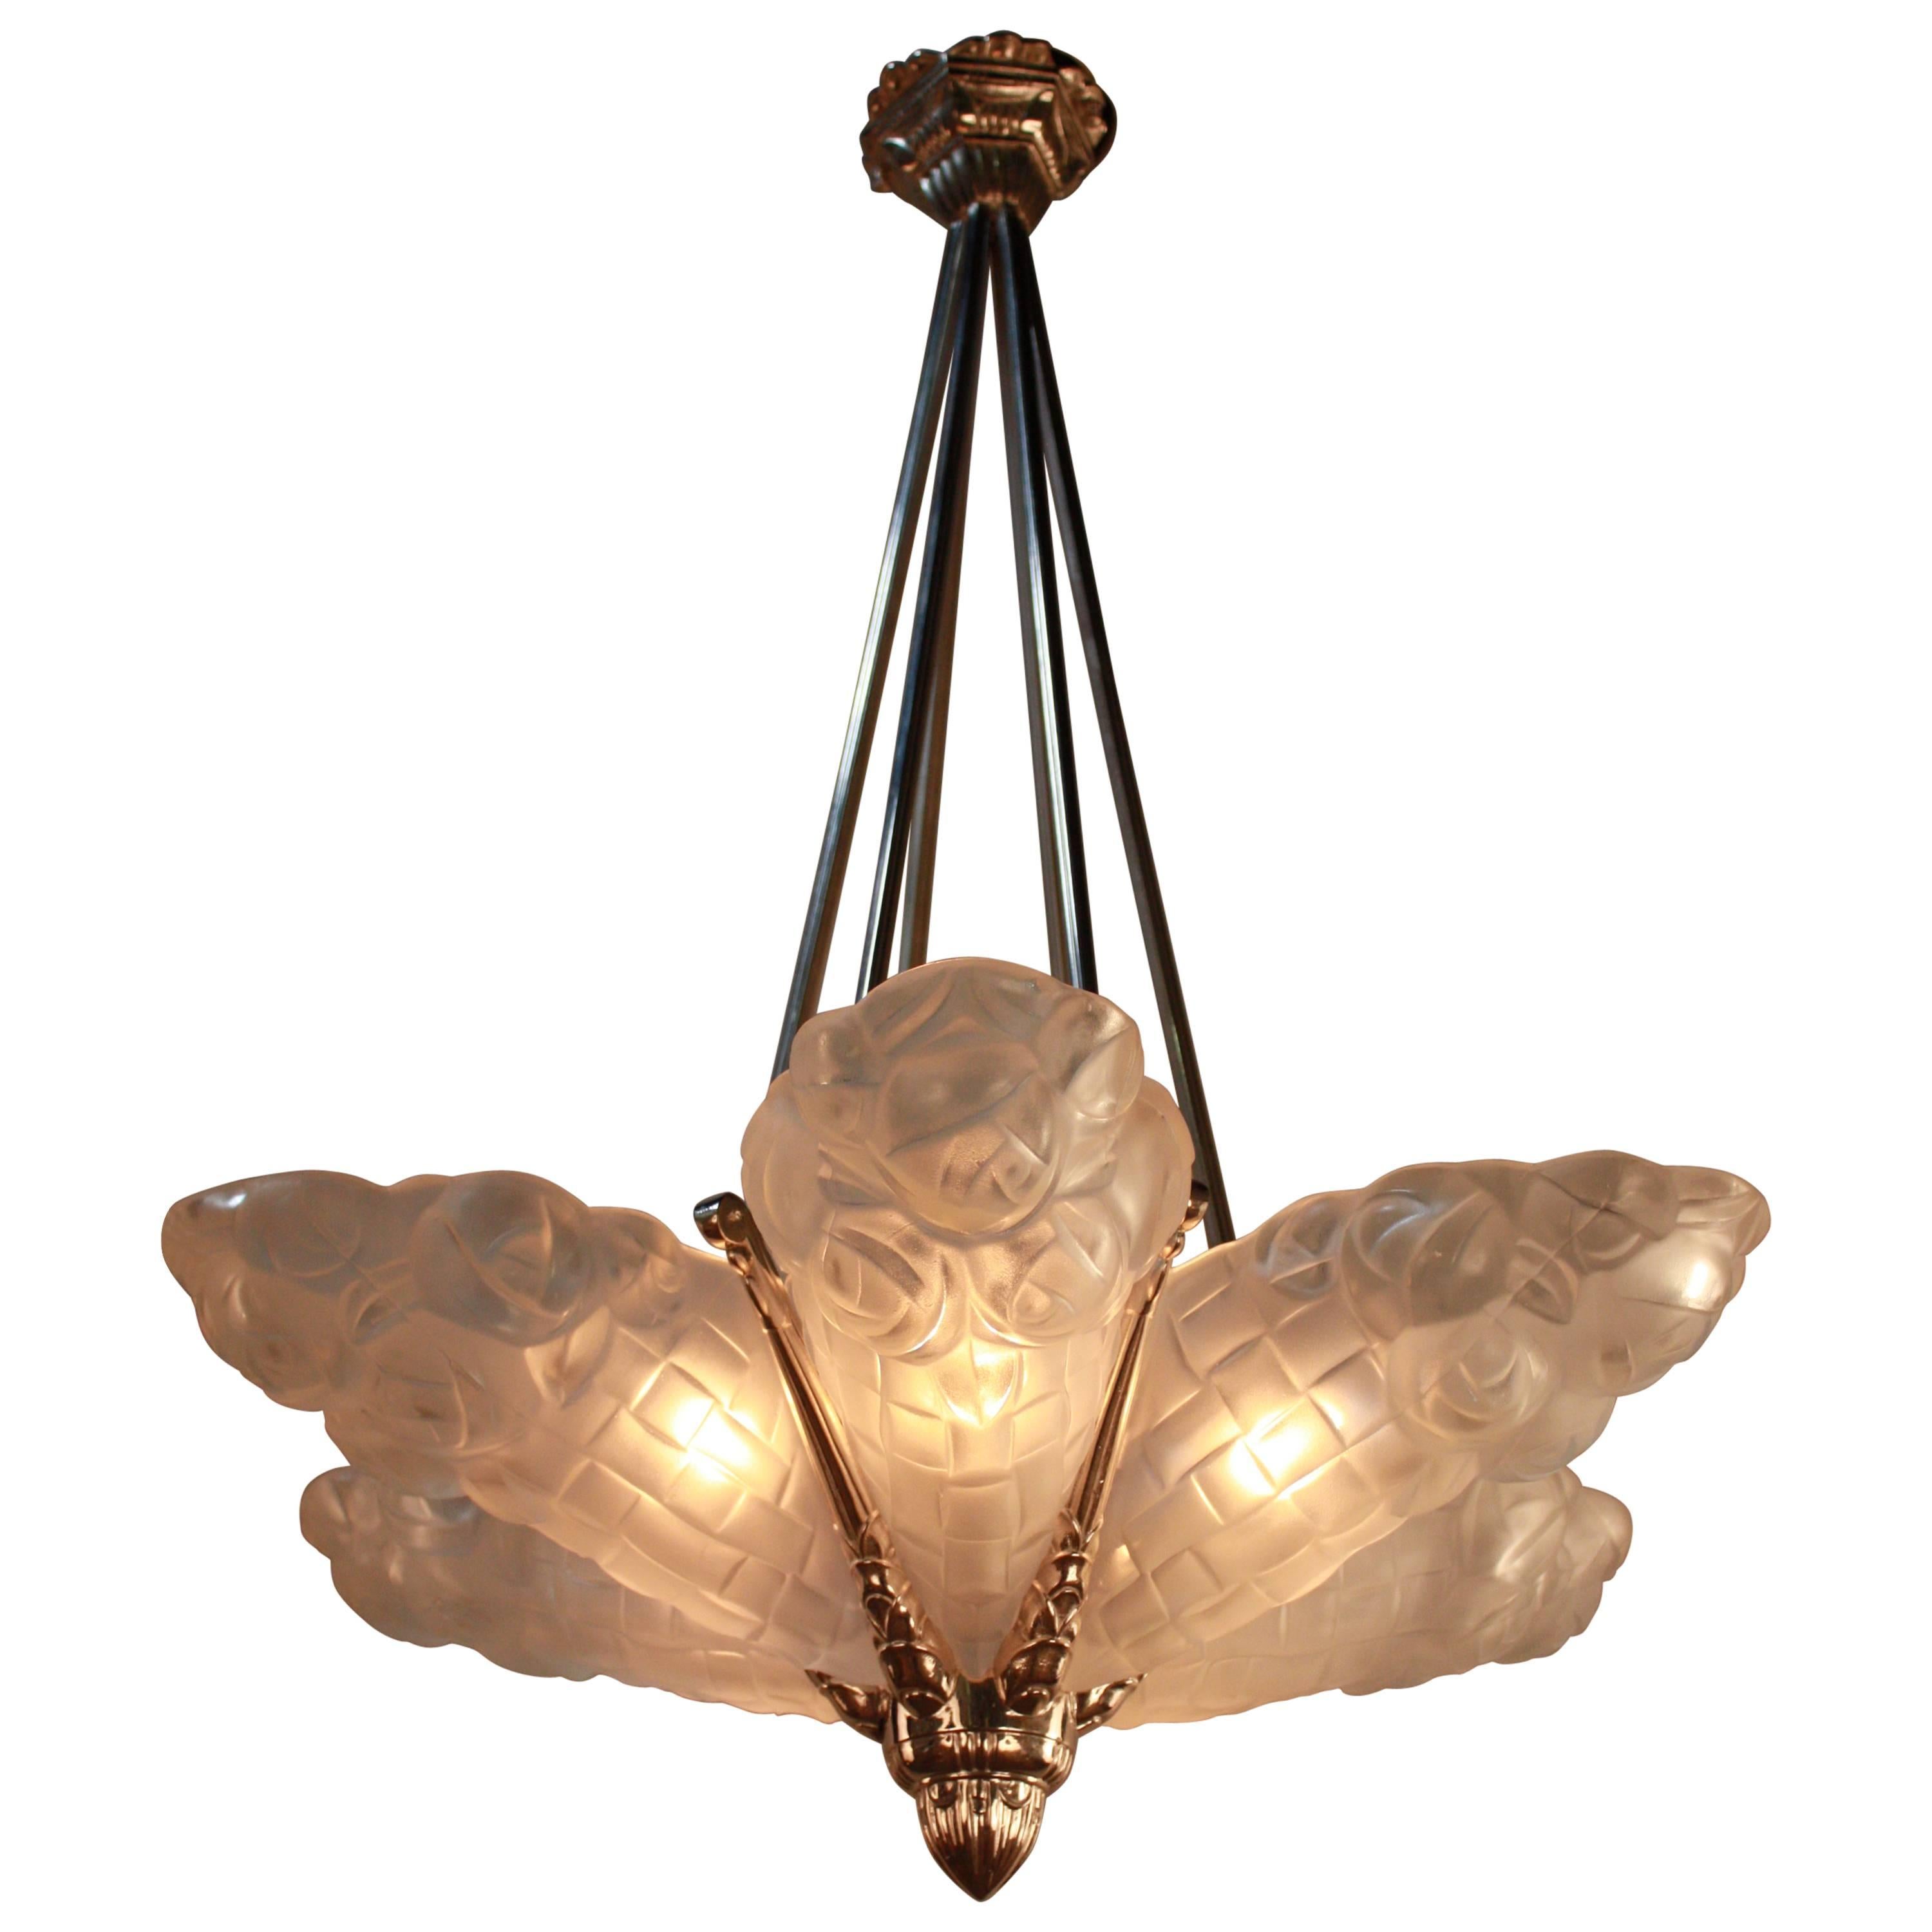 French Art Deco Chandelier, 1930s by Degue